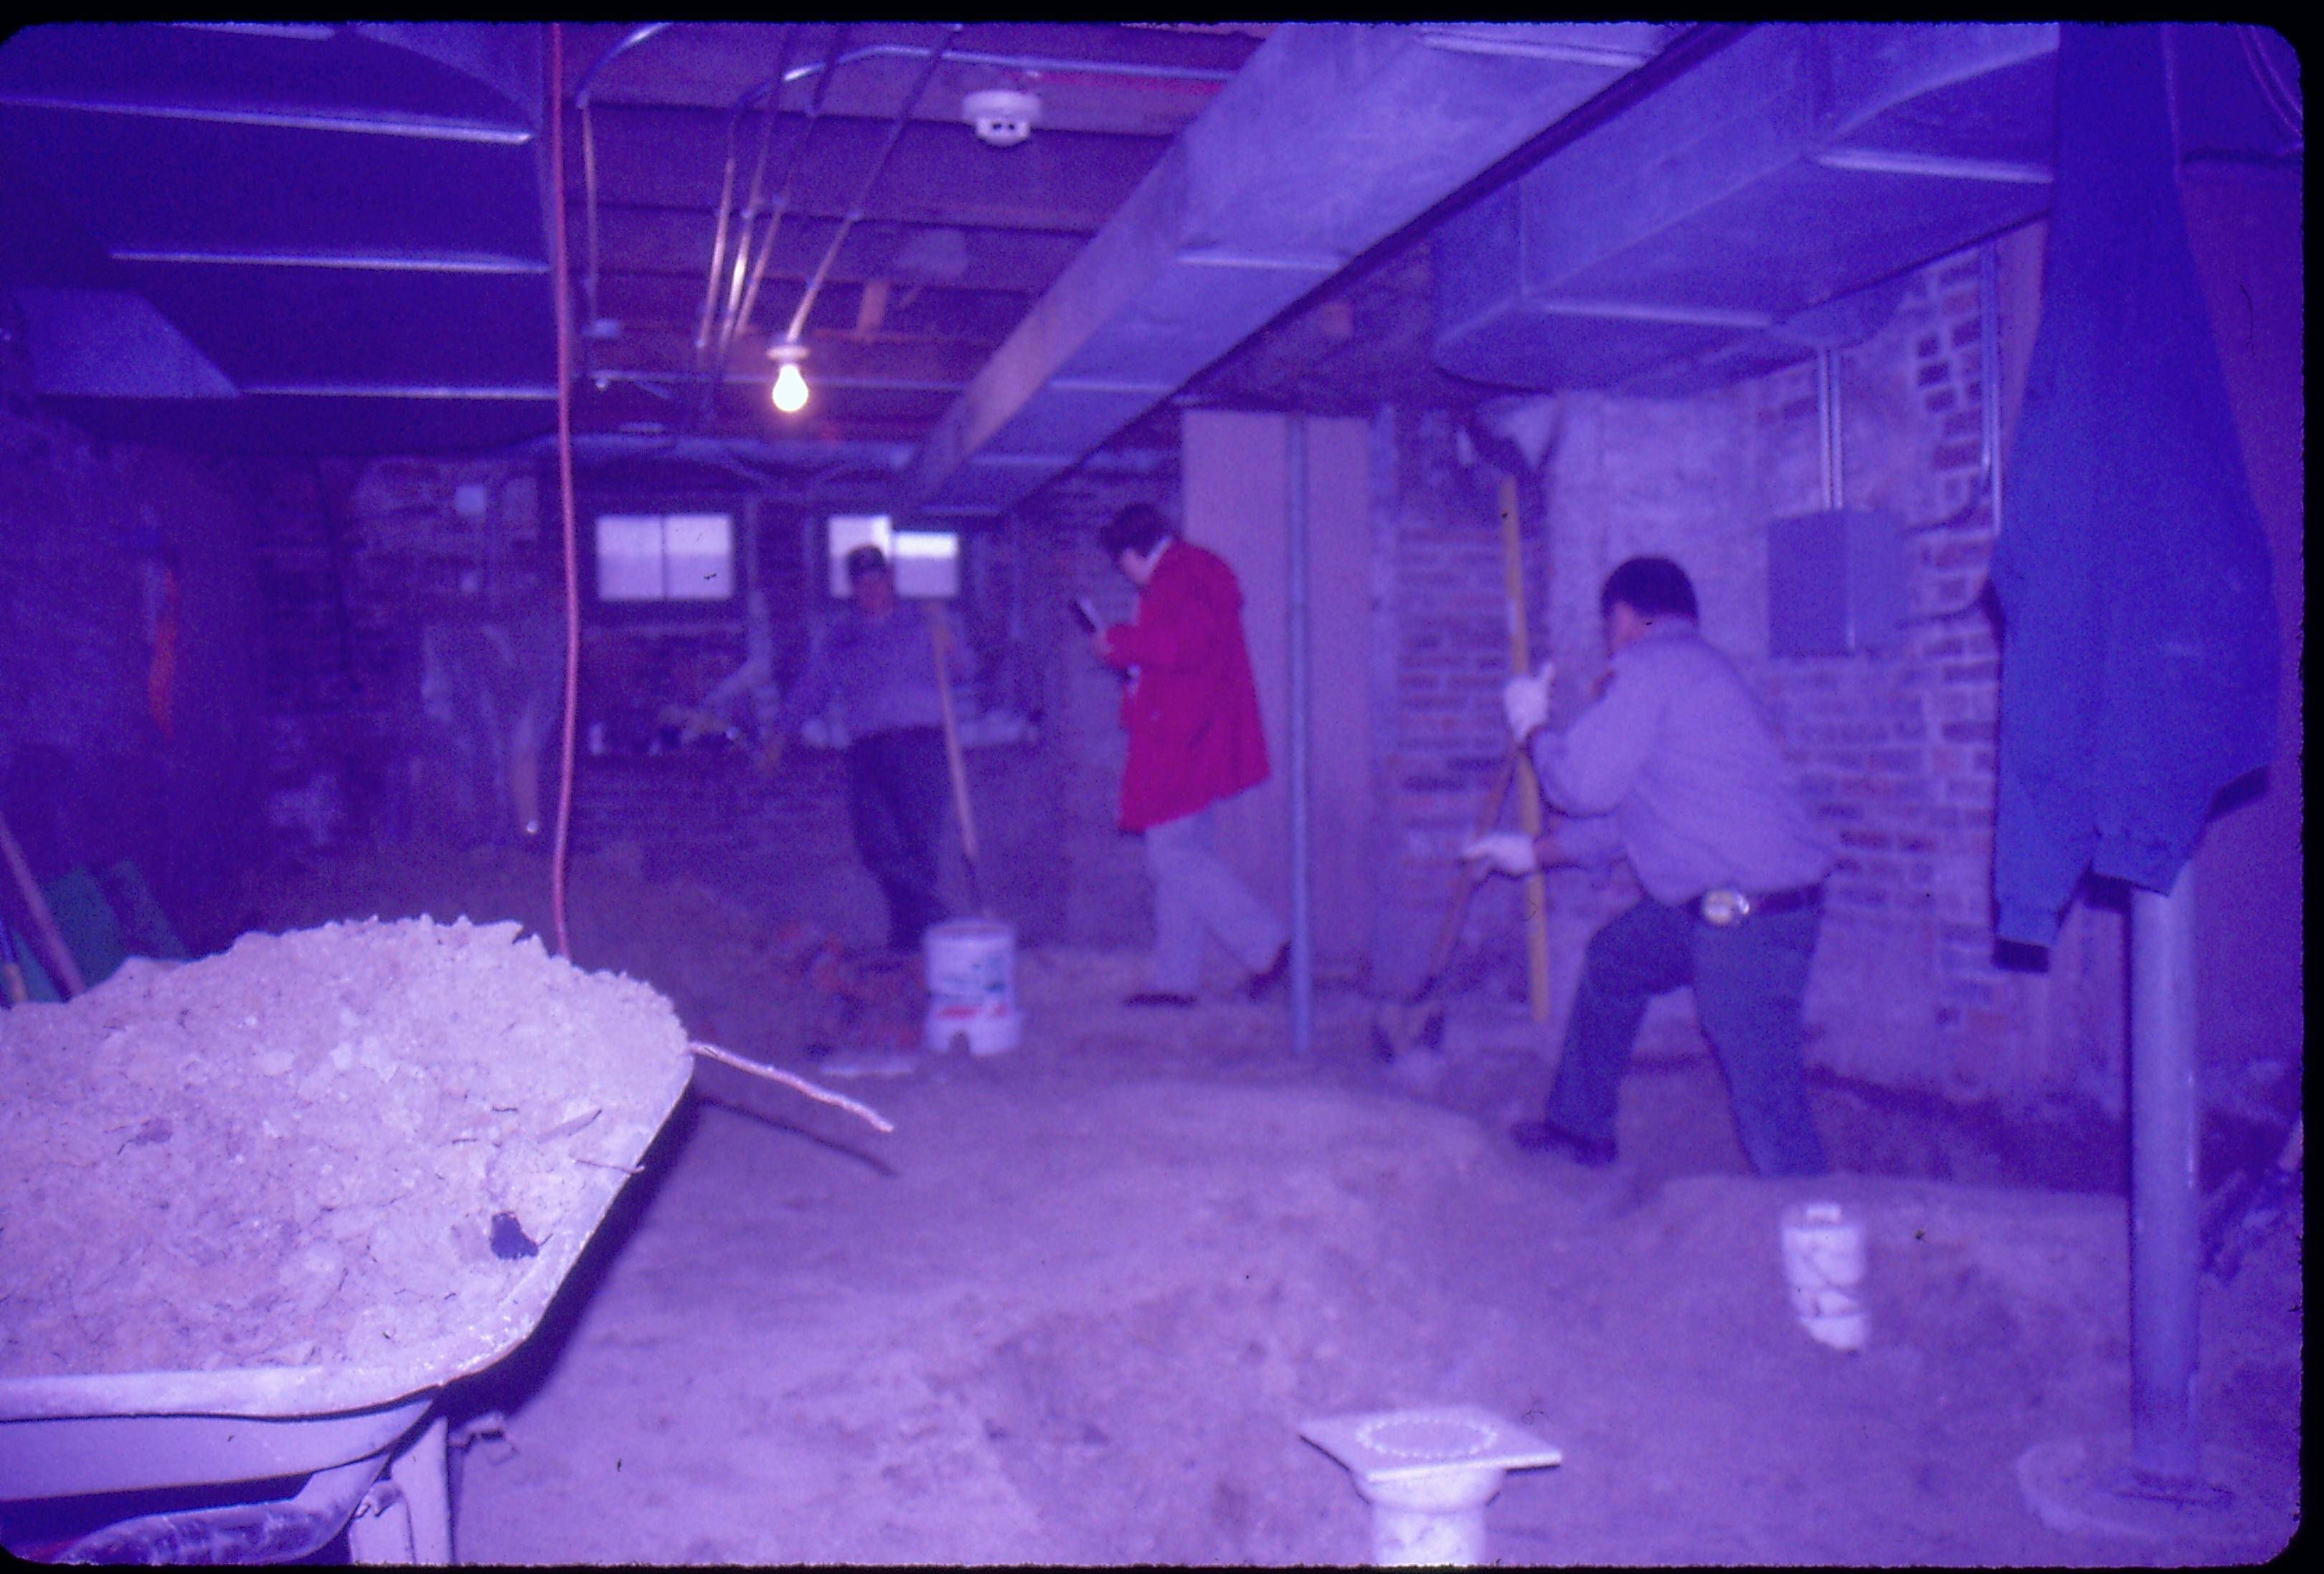 Lyon House - basement. Maintenance Workers Tom Melton? in background, and Tom Pacha dig out trench while Curator Susan Haake checks out the flooring near the doorway. Wheel barrow and square floor drain in foreground. Cords and other equipment scattered around. Circuit breaker box visible behind Tom Pacha Looking South/Southwest in basement Lyon, Basement, staff, duct work, trench, utilities